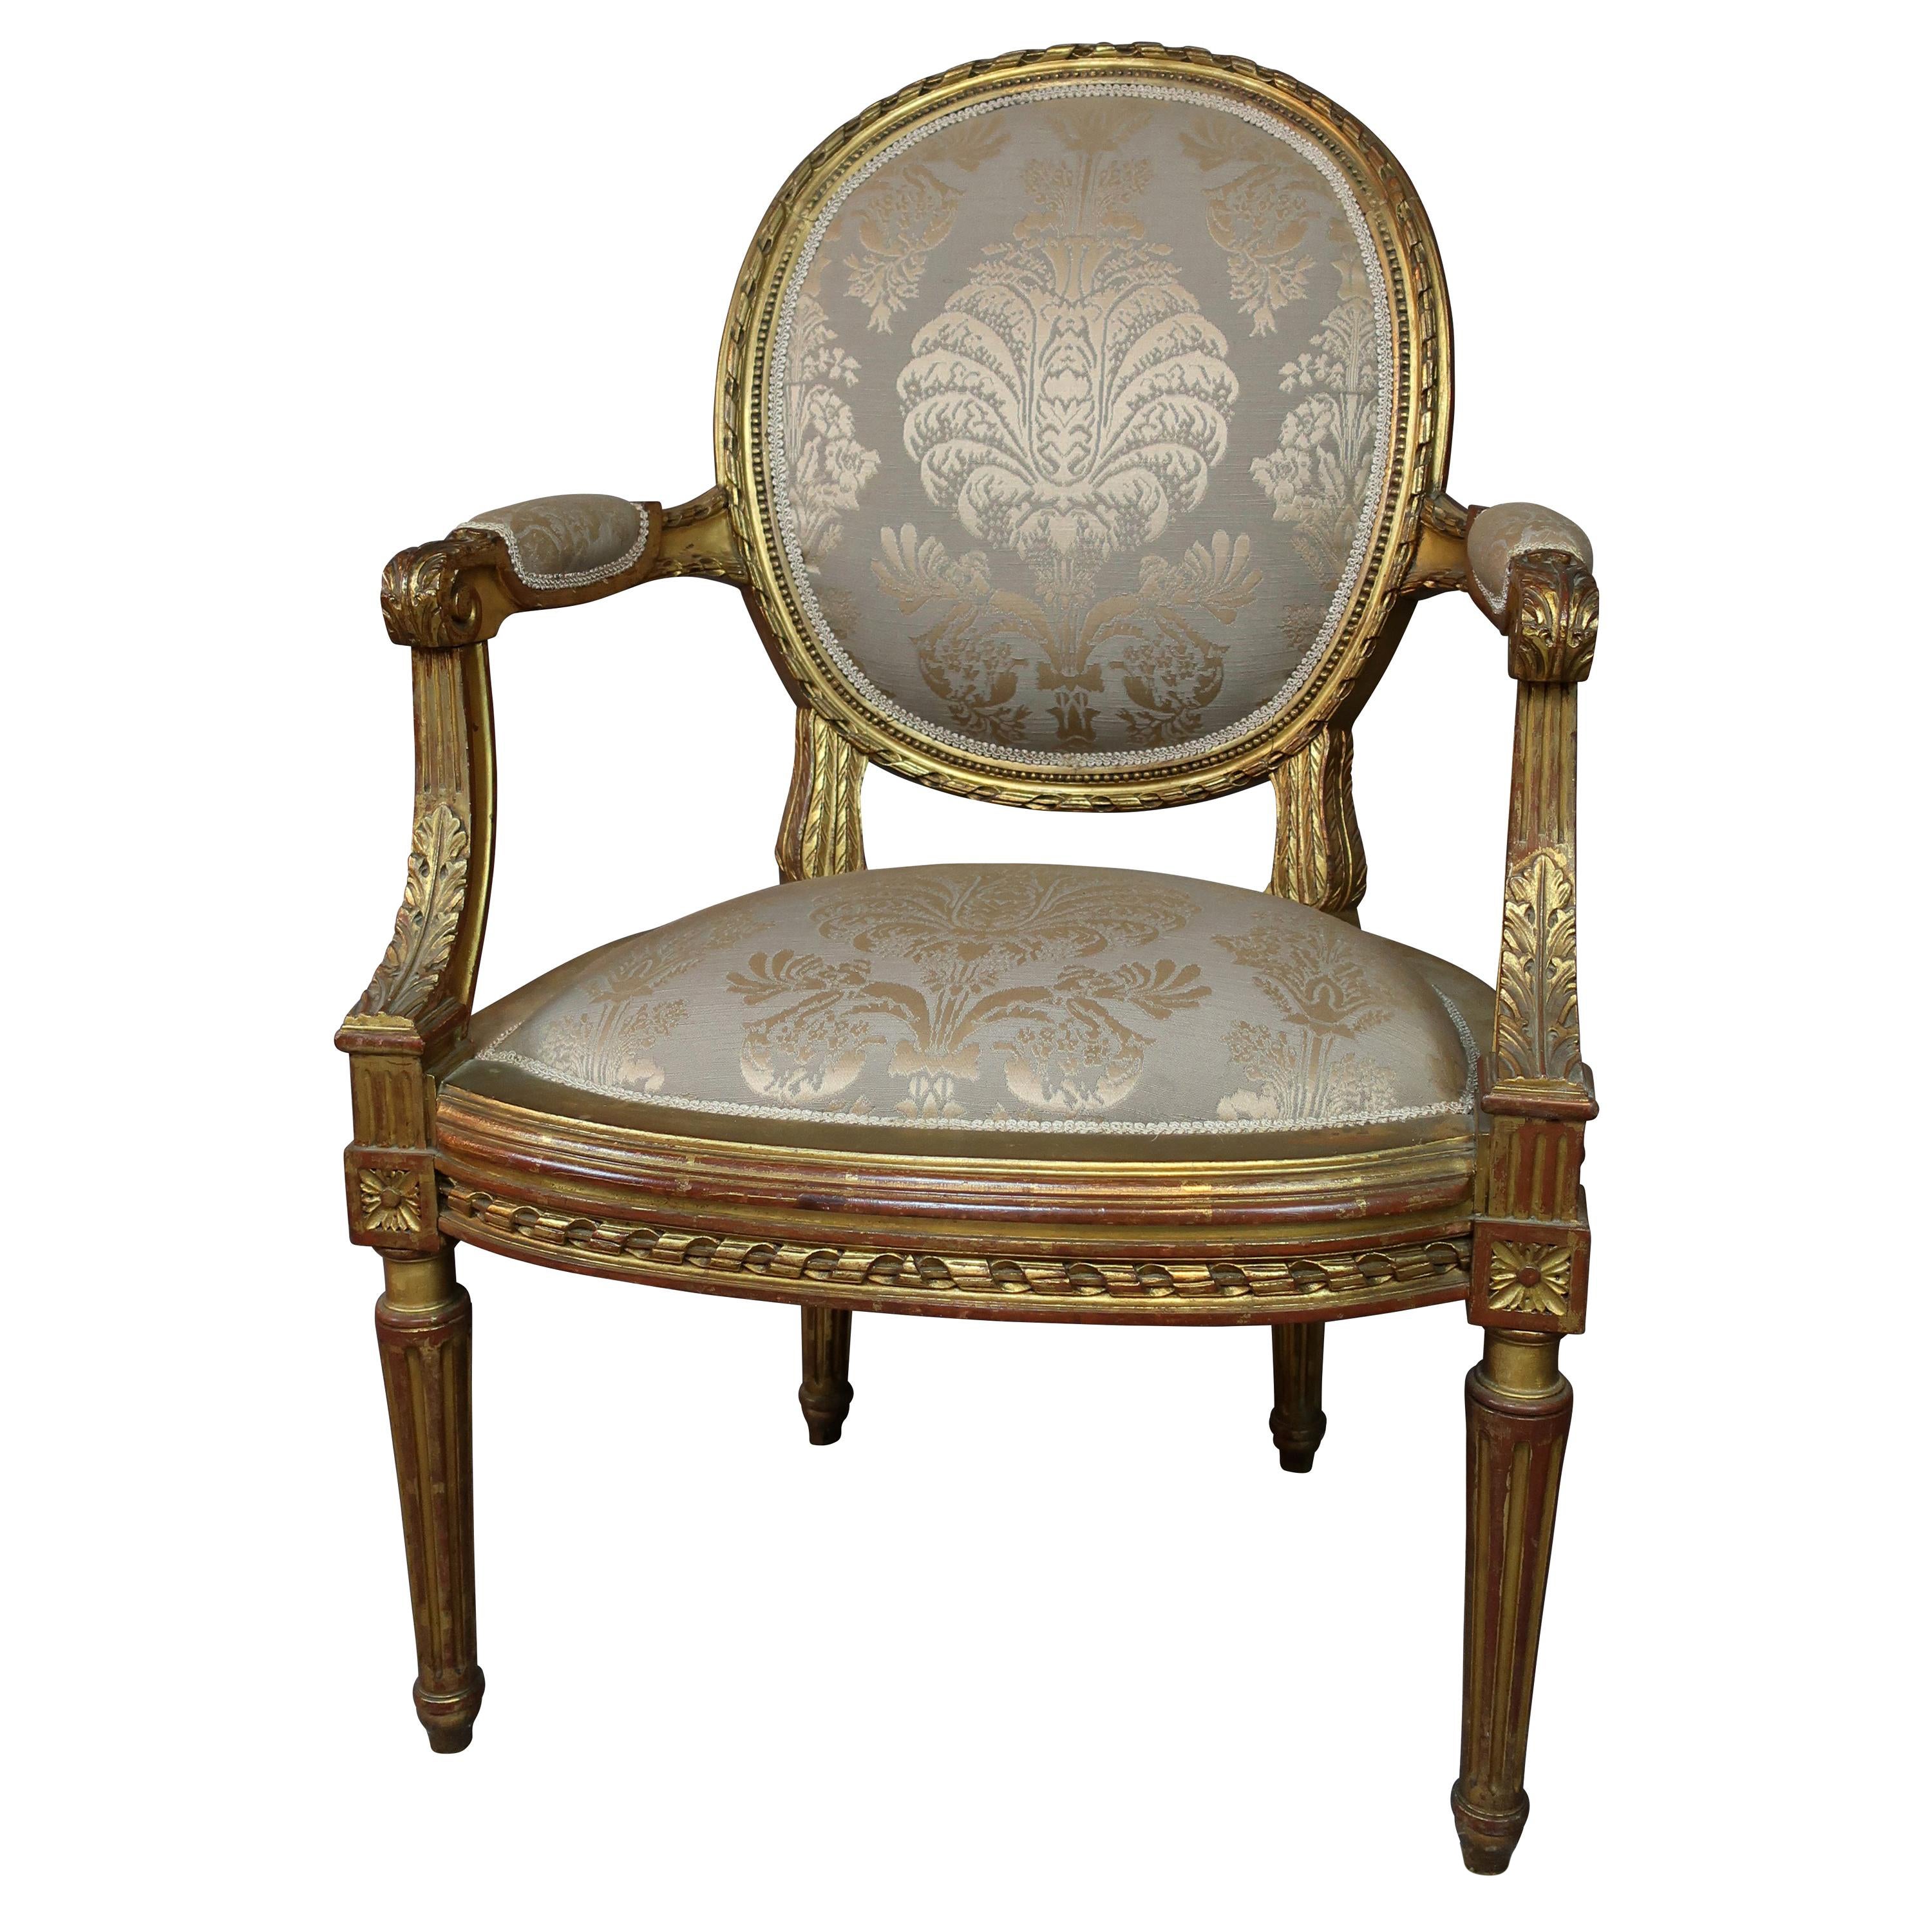 Louis XVI Style French Gilt Chair with Antique Damask Grey/Taupe Fabric